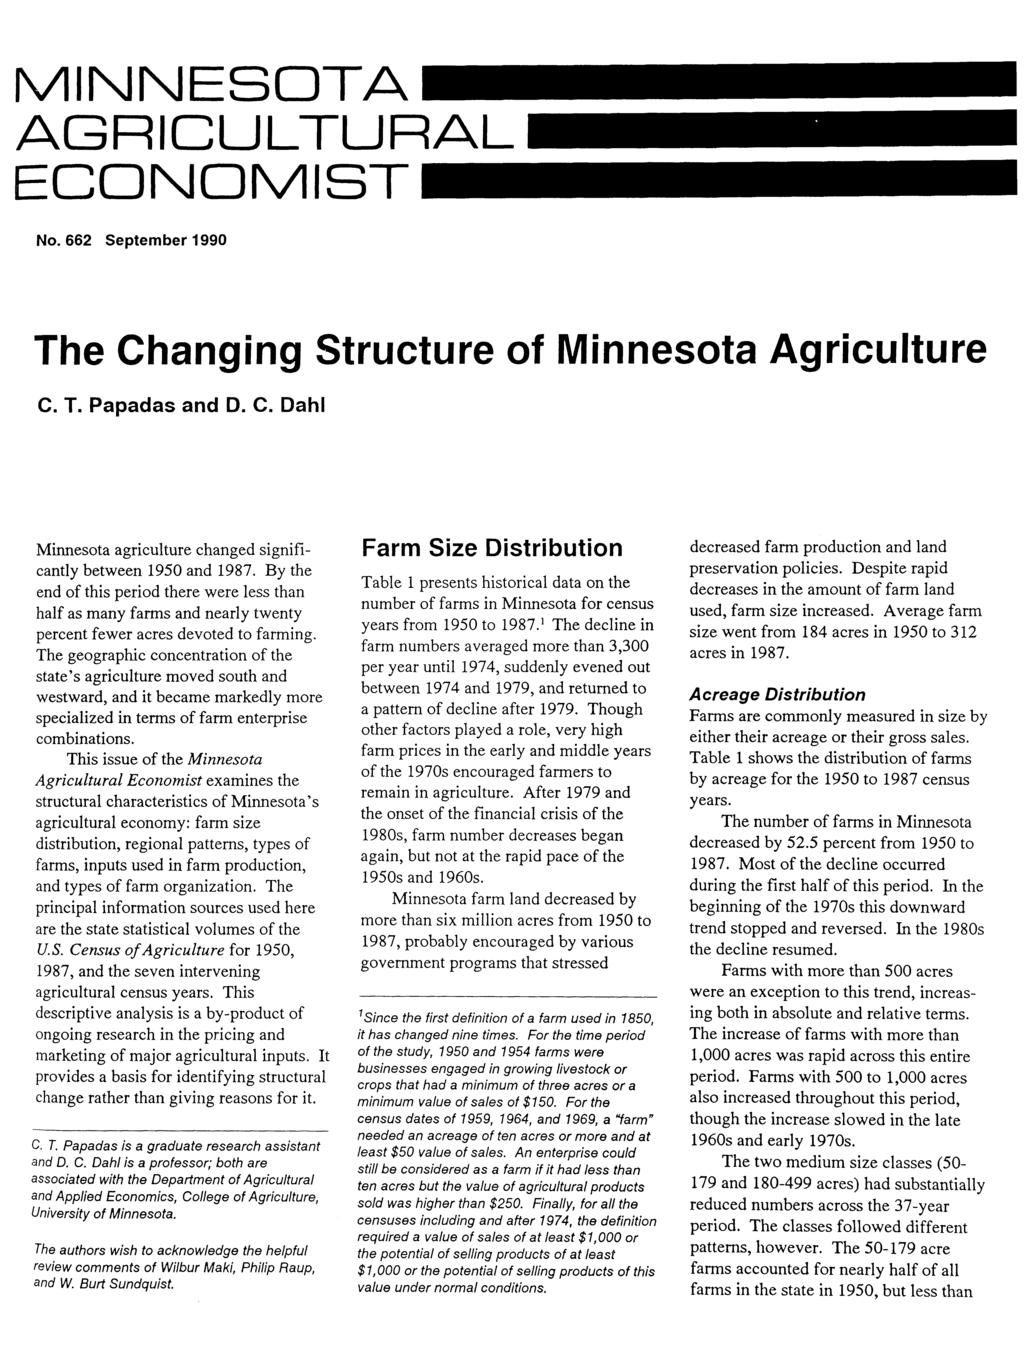 MINNESOTA AGRICULTURAL ECONOMIST No. 662 September 1990 The Changing Structure of Minnesota Agriculture C. T. Papadas and D. C. Dahl Minnesota agriculture changed significantly between 1950 and 1987.